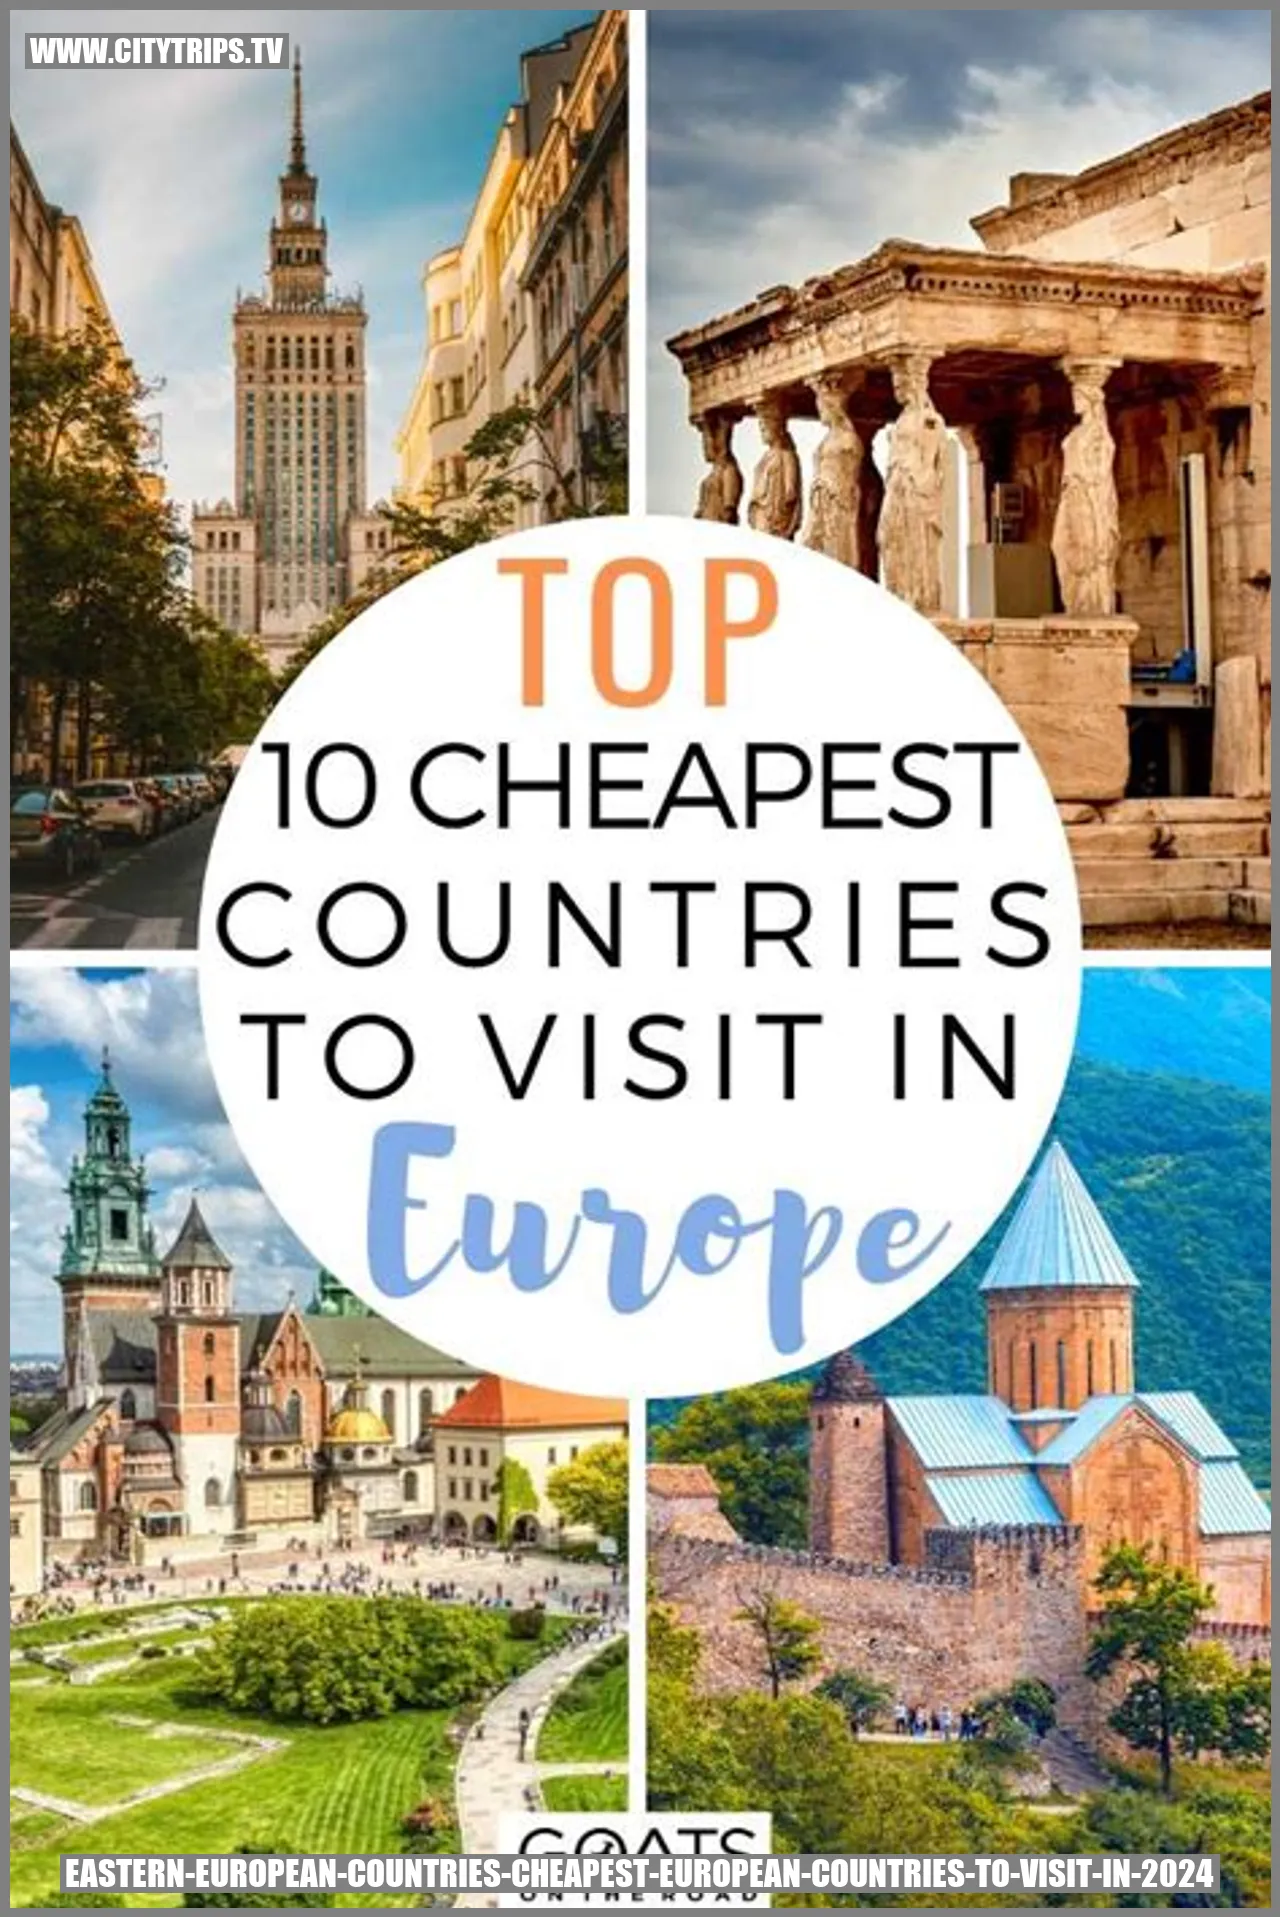 Cheapest European Countries To Visit In 2024